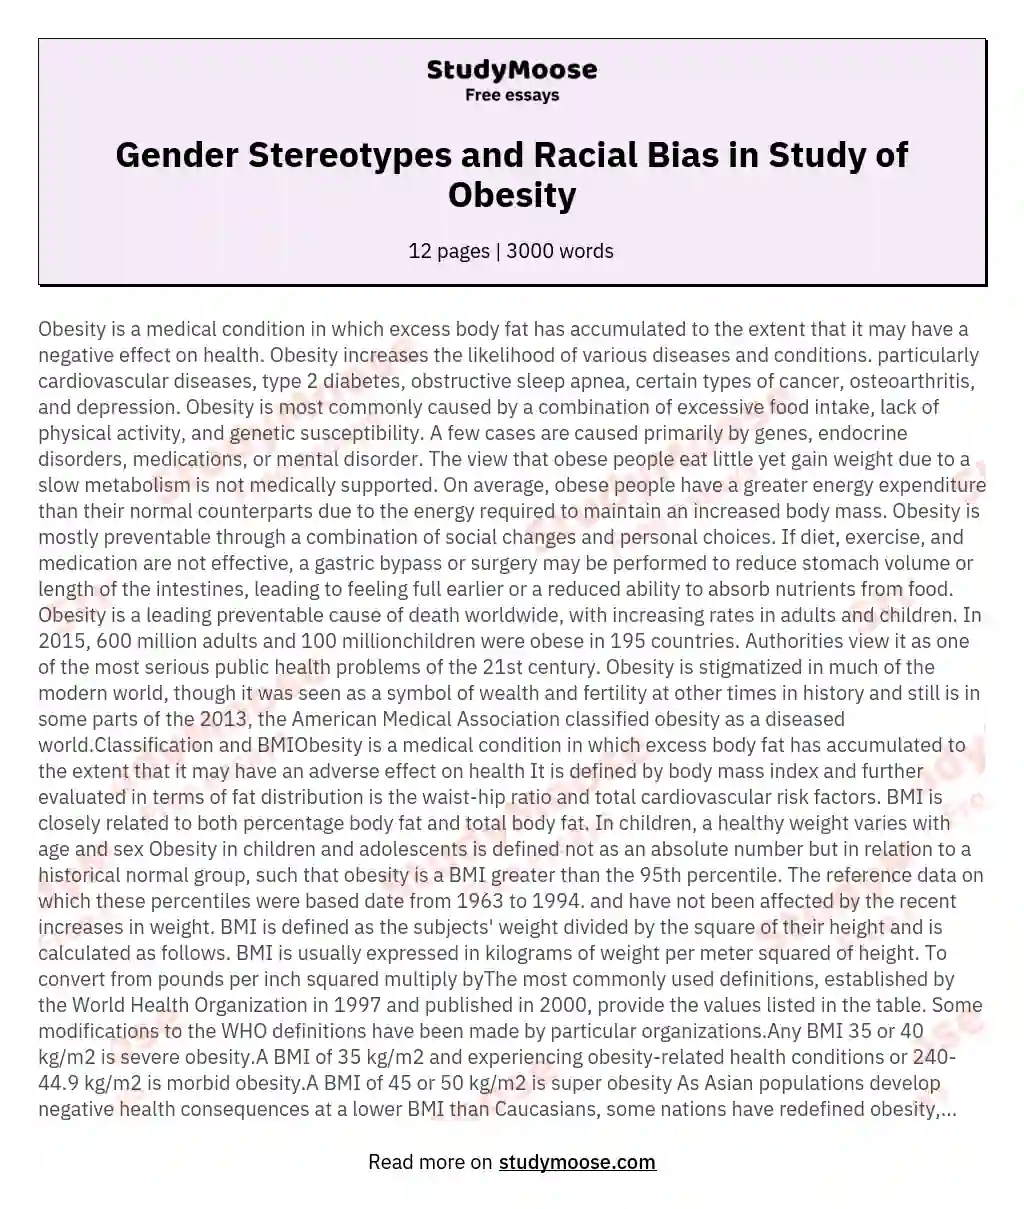 Gender Stereotypes and Racial Bias in Study of Obesity